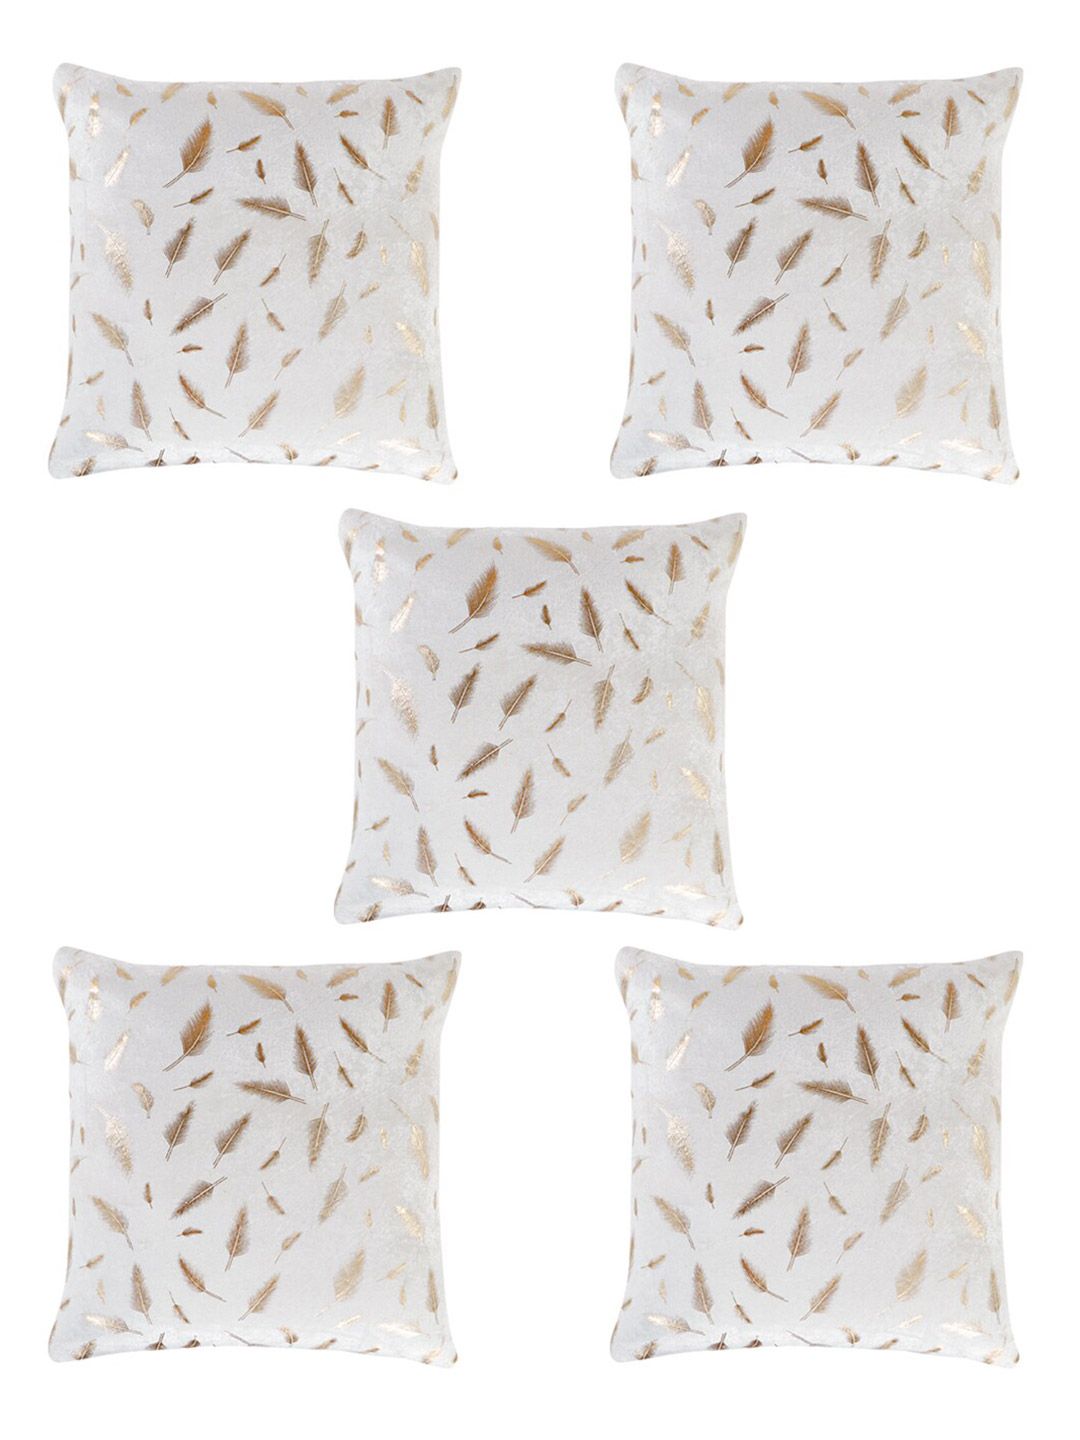 SOKNACK Adults Set of 5 White & Gold-Toned Feather Pattern Square Cushion Covers Price in India